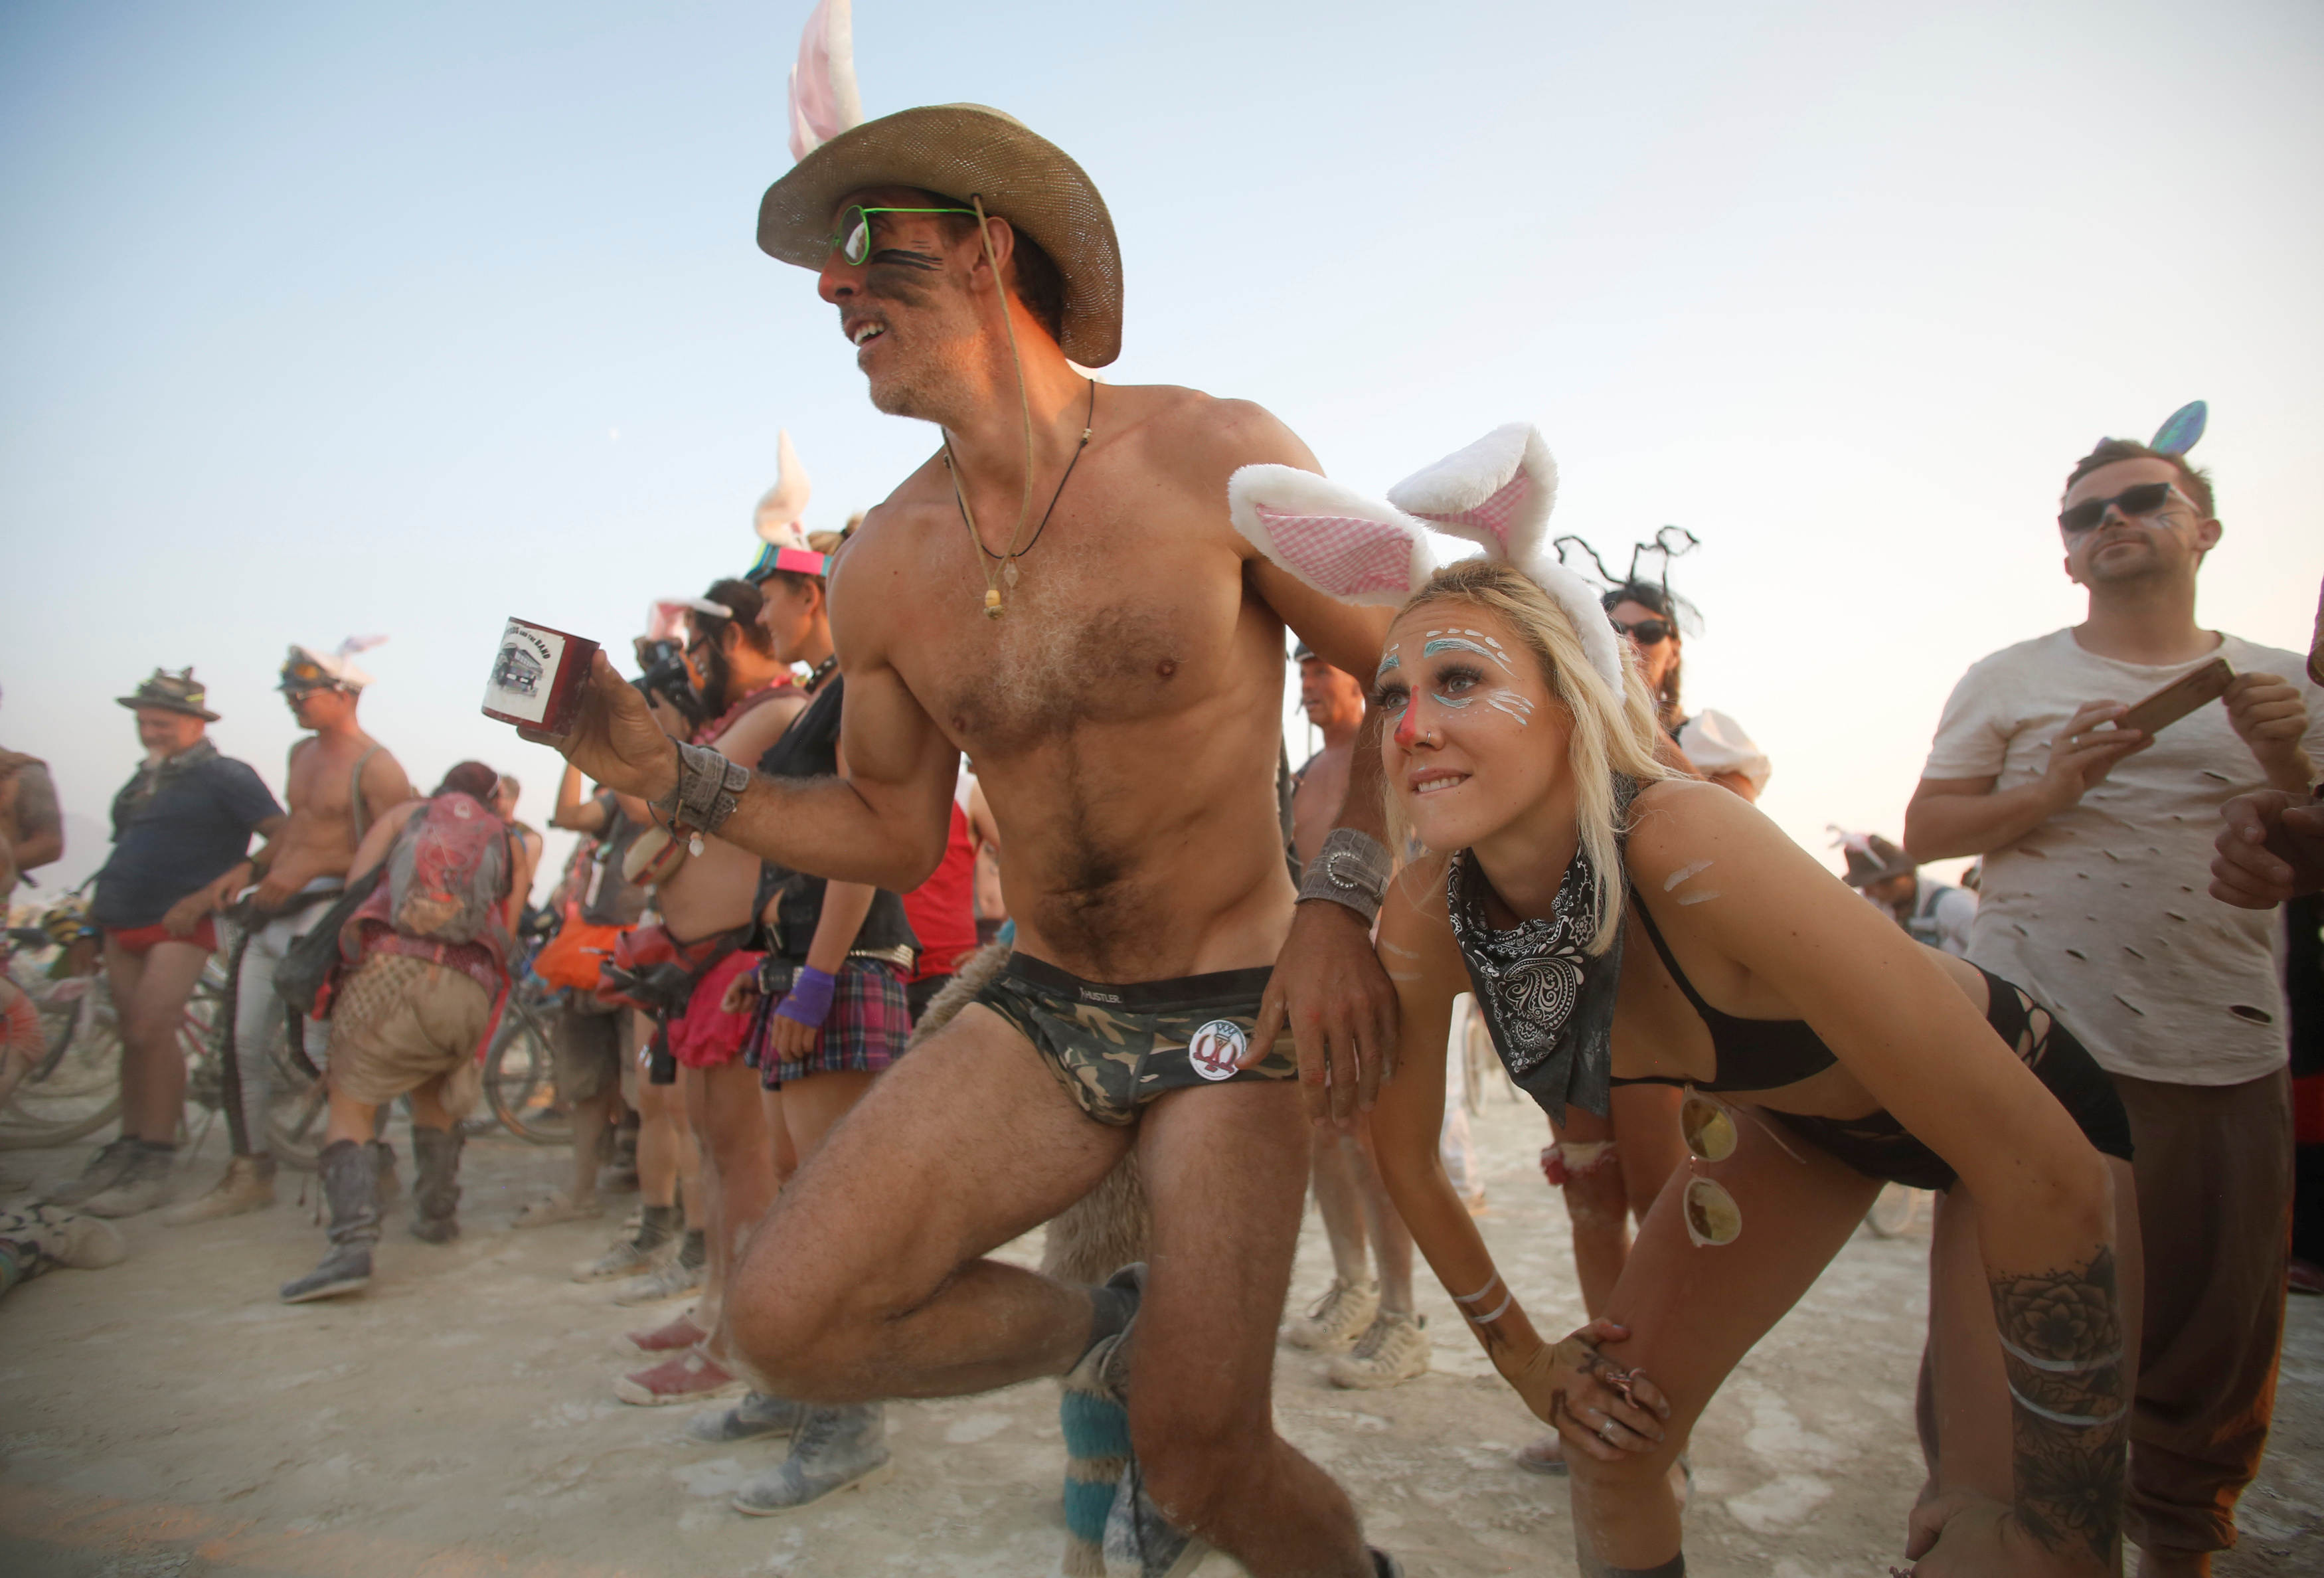 christopher wilhelm recommends Topless At Burning Man